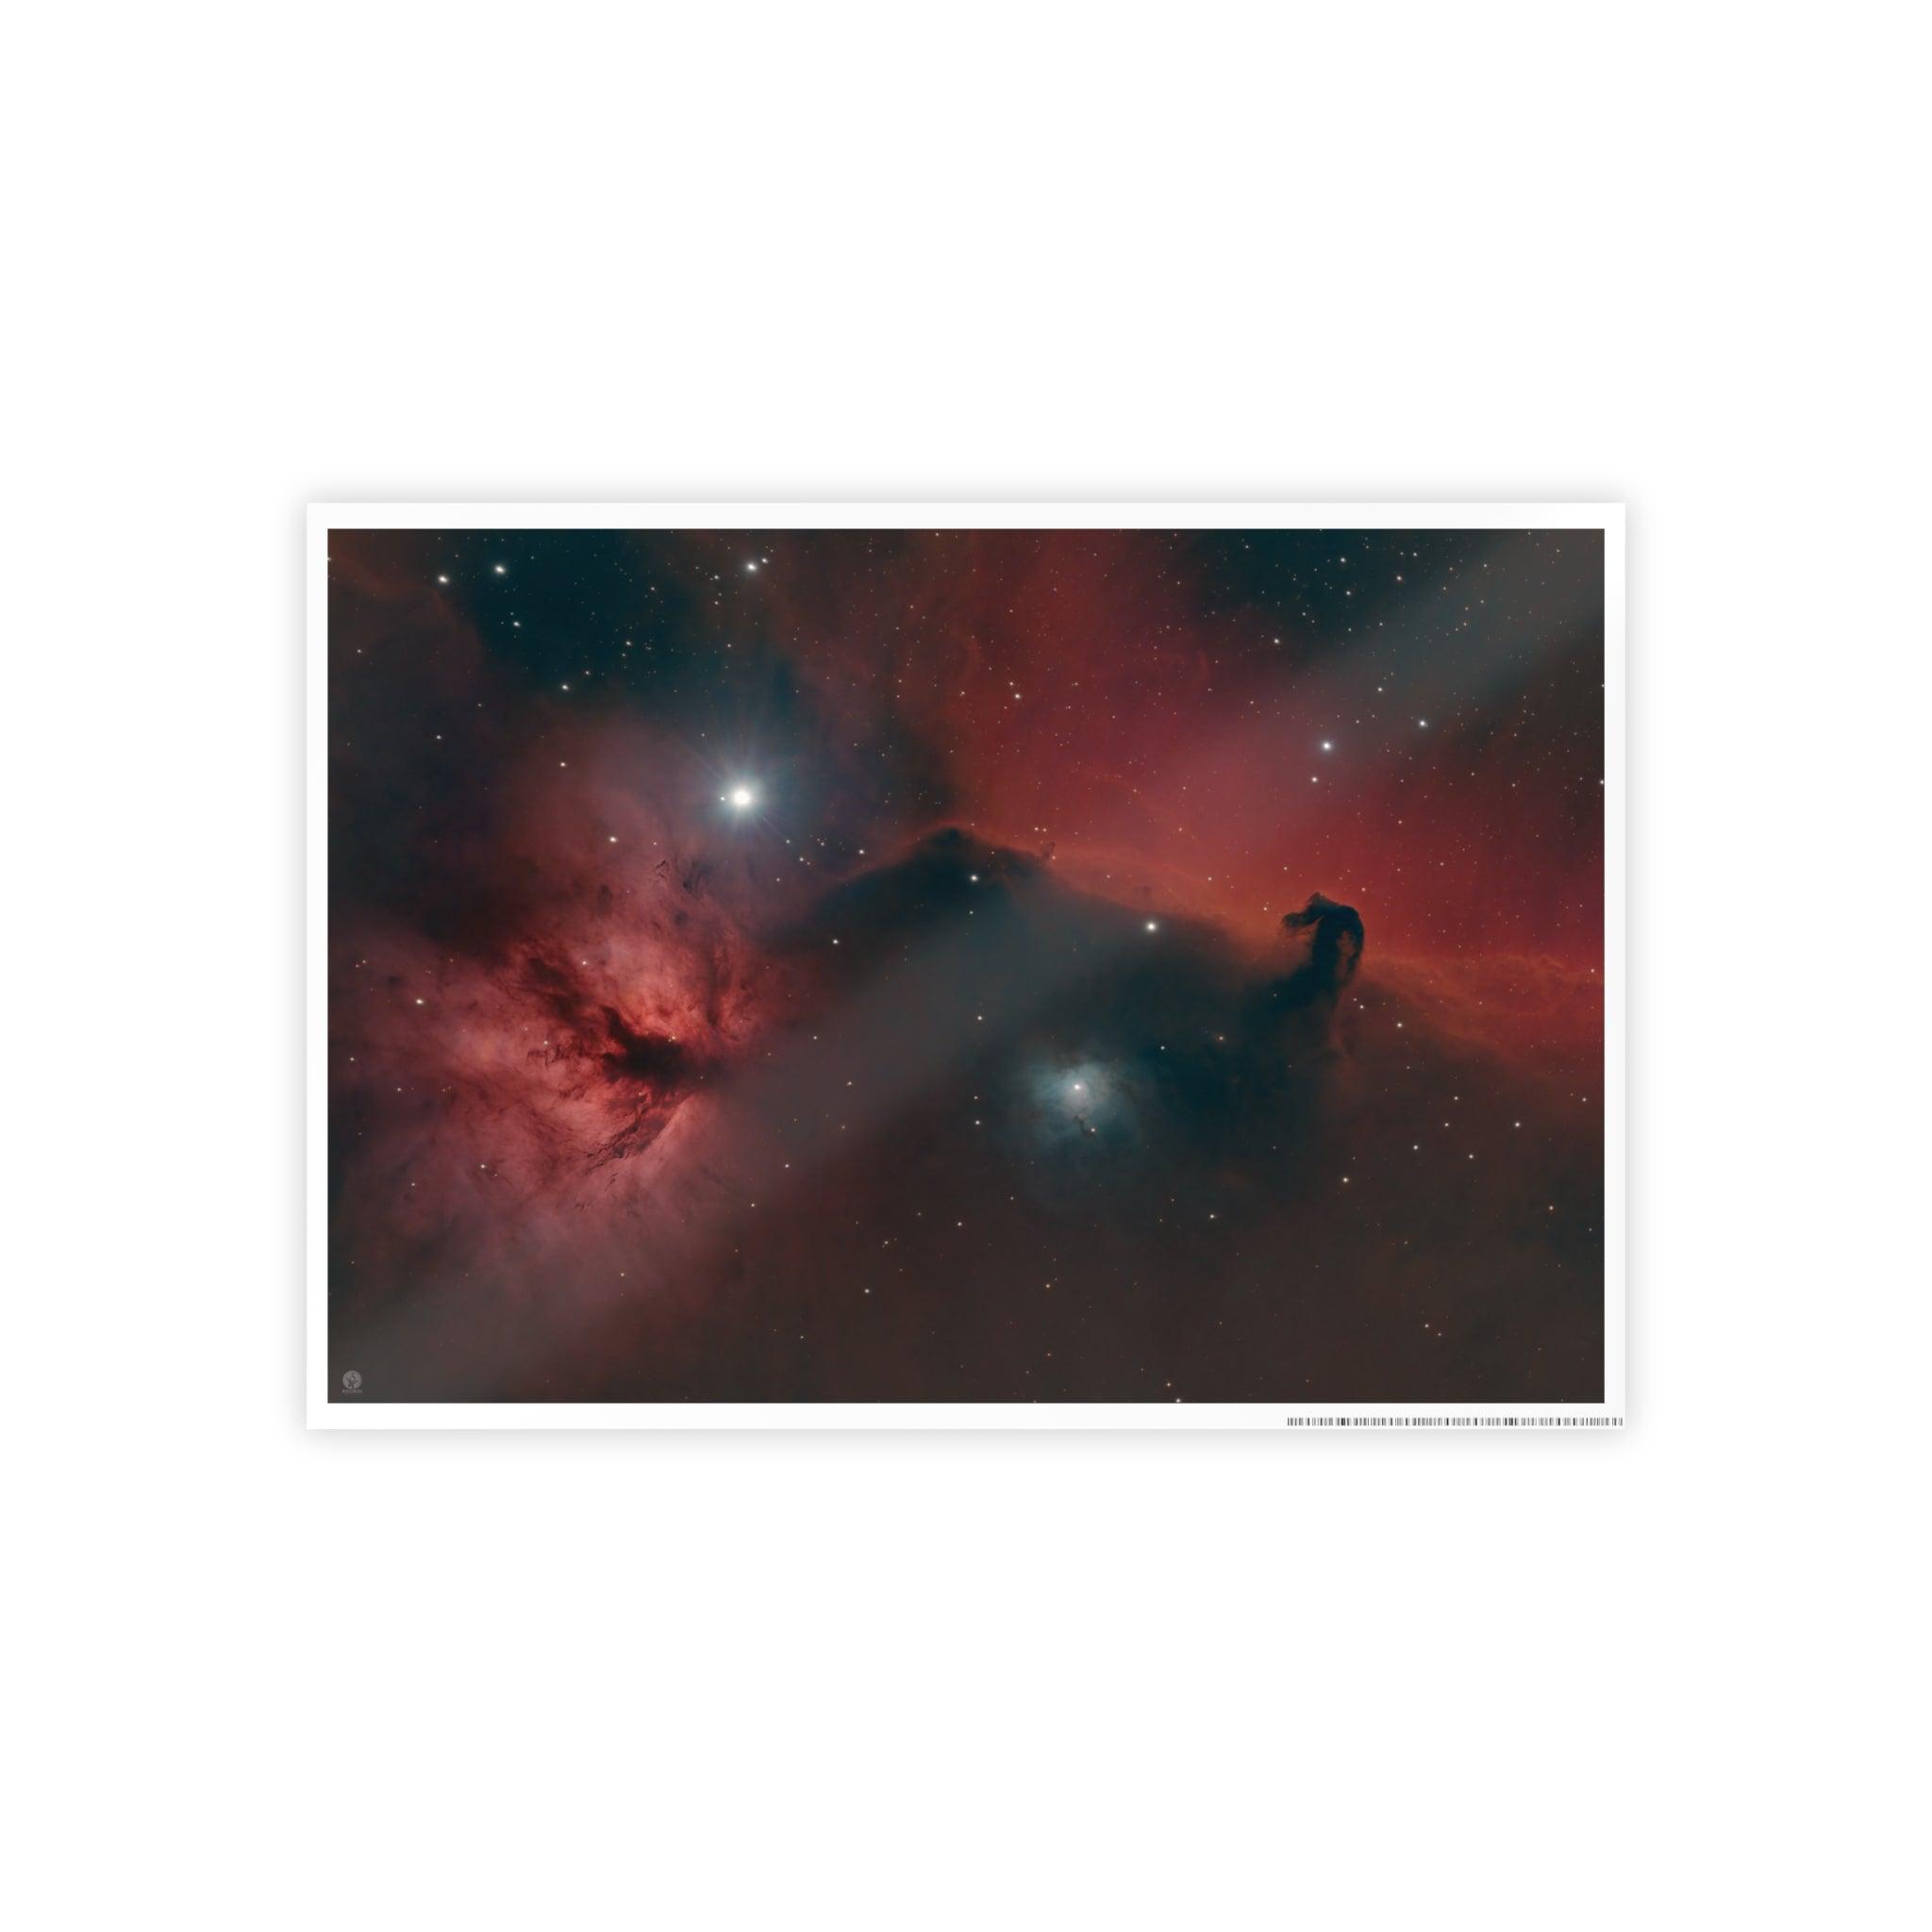 Poster of the Horsehead and Flame Nebulae